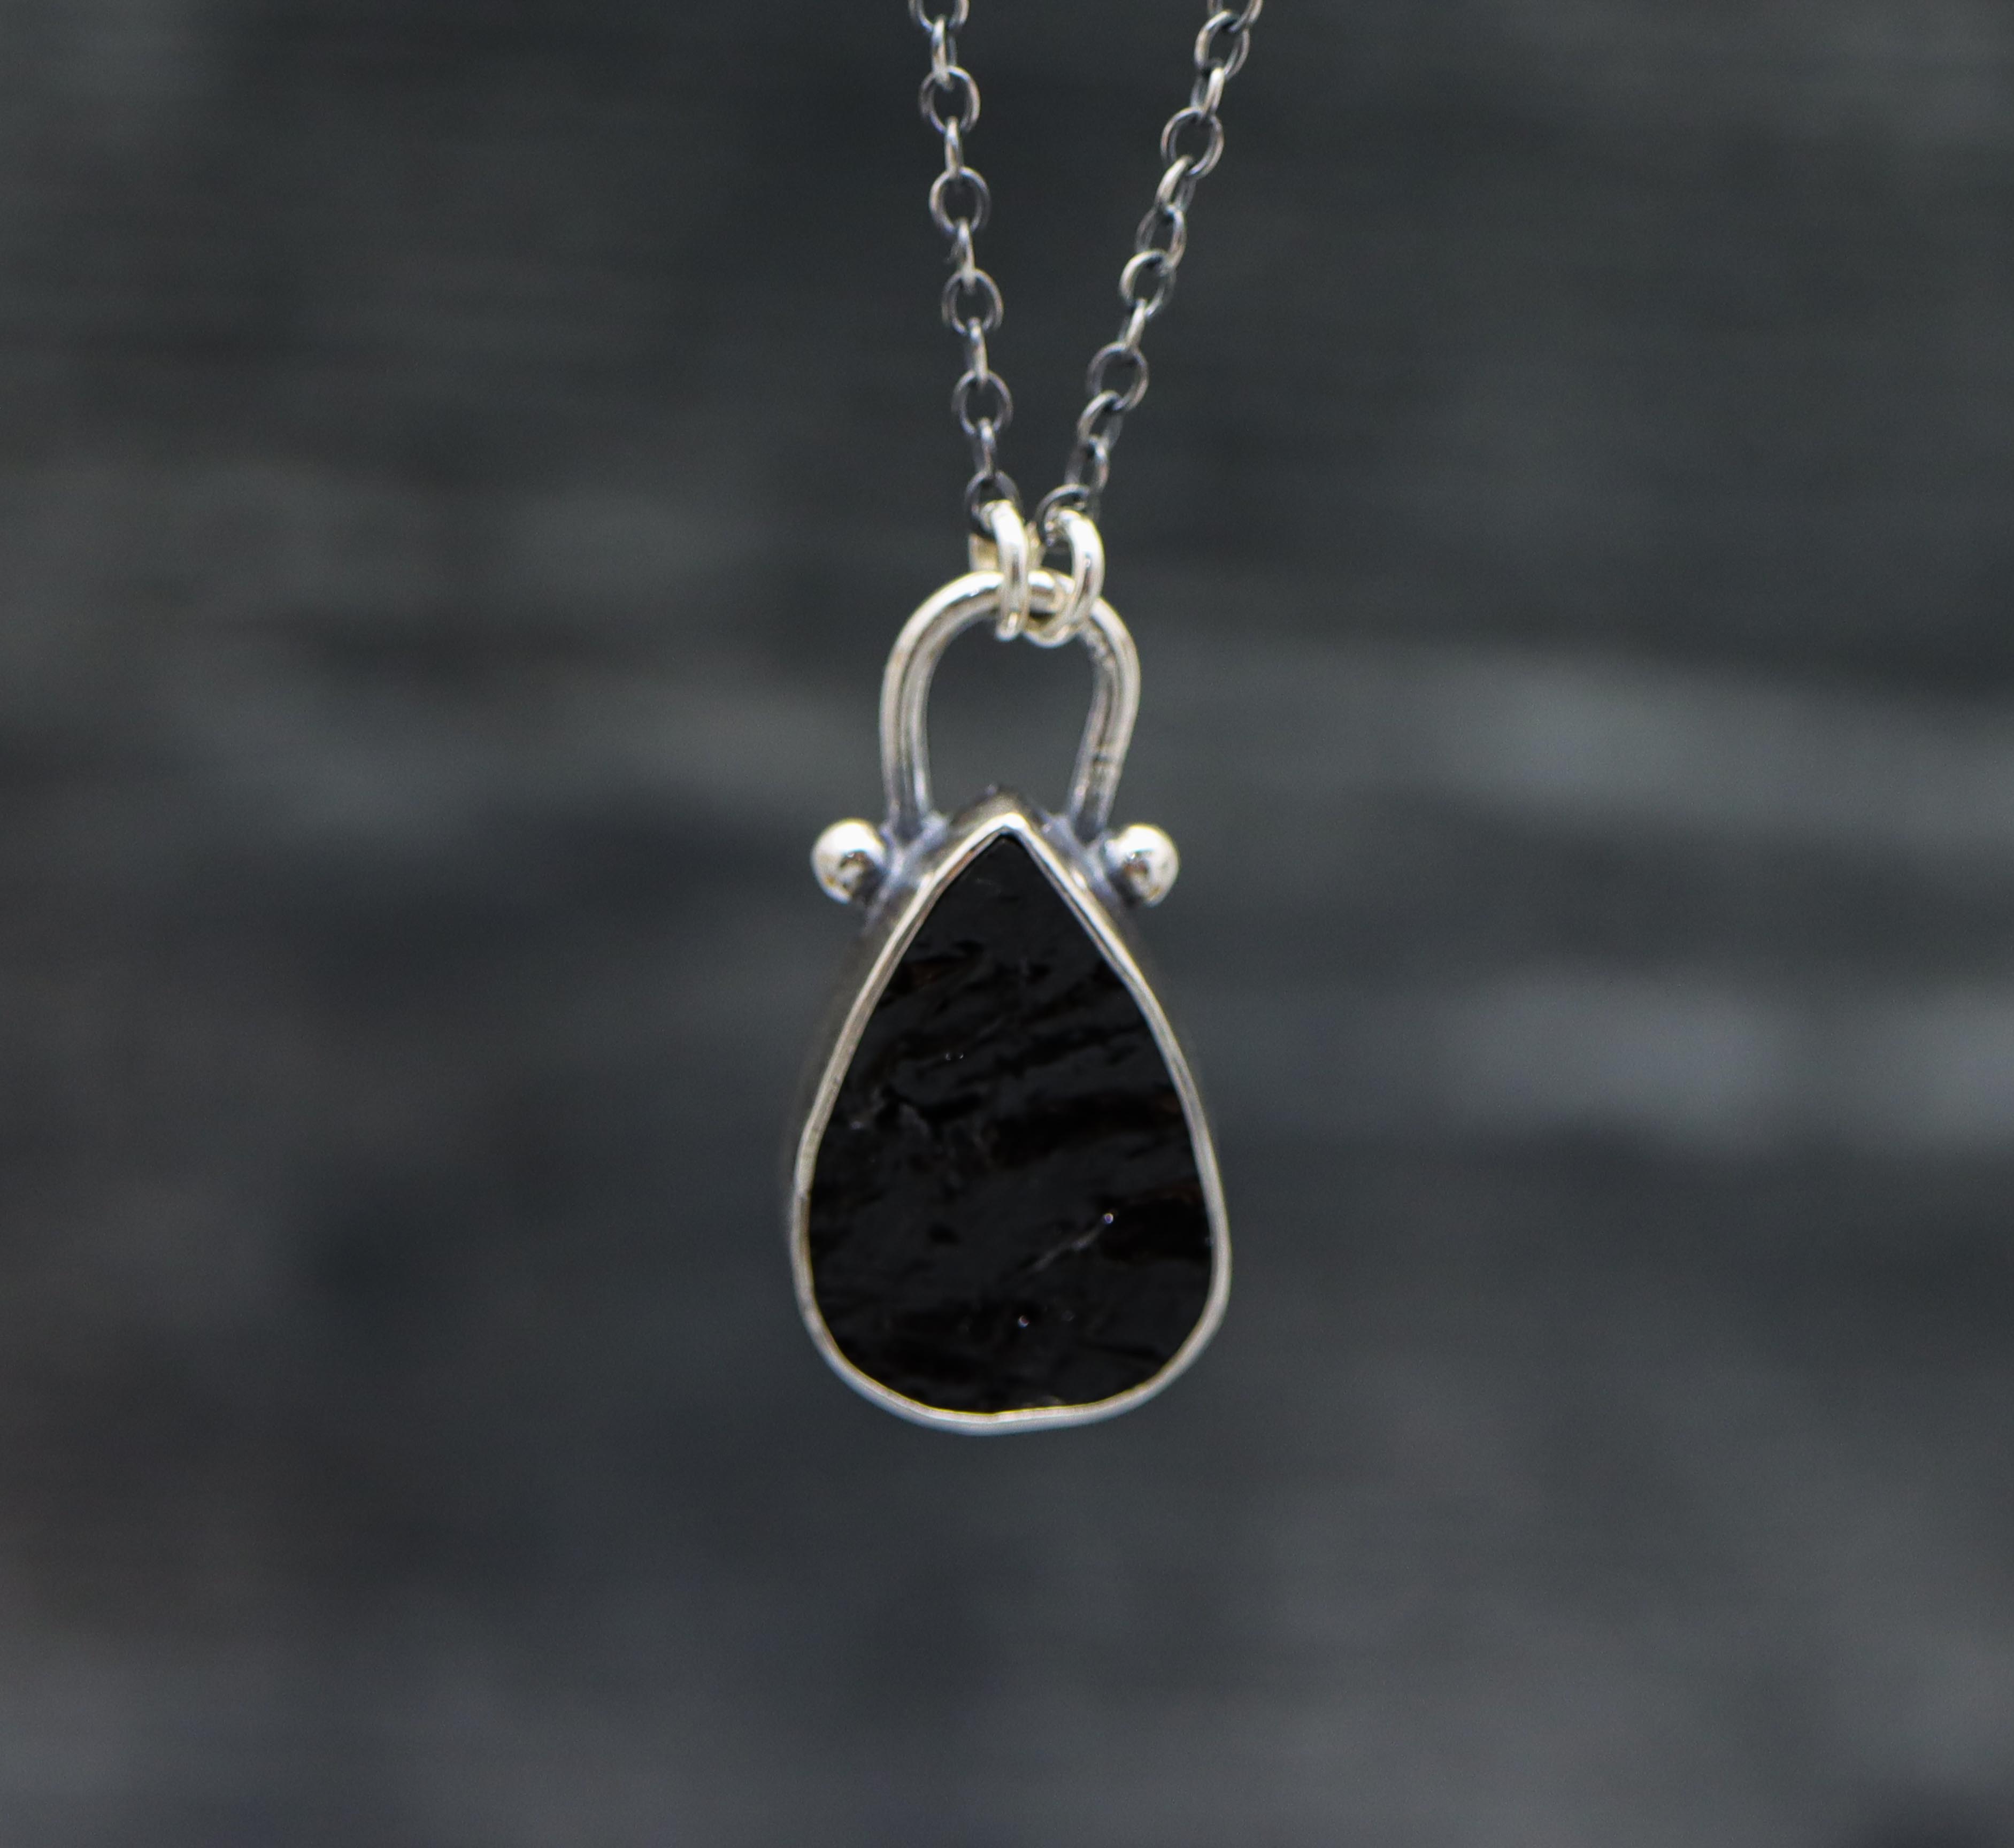 Natural Surface Black Tourmaline Pendant Necklace Sterling Silver